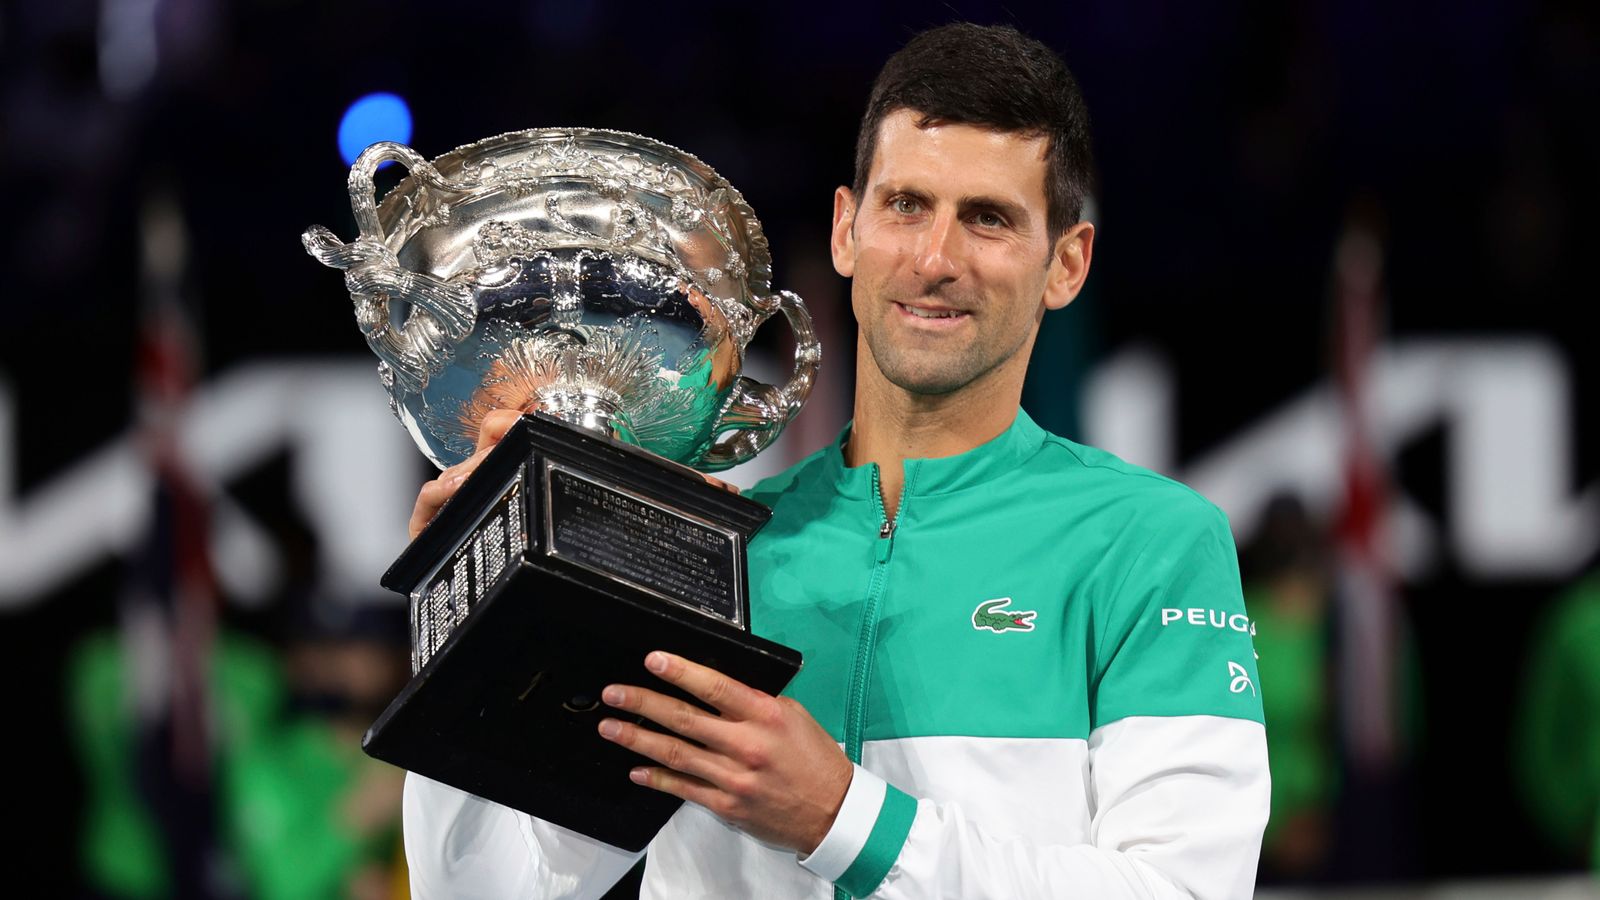 Australian Open: Novak Djokovic and all players have to be vaccinated against Covid-19 to play at Grand Slam